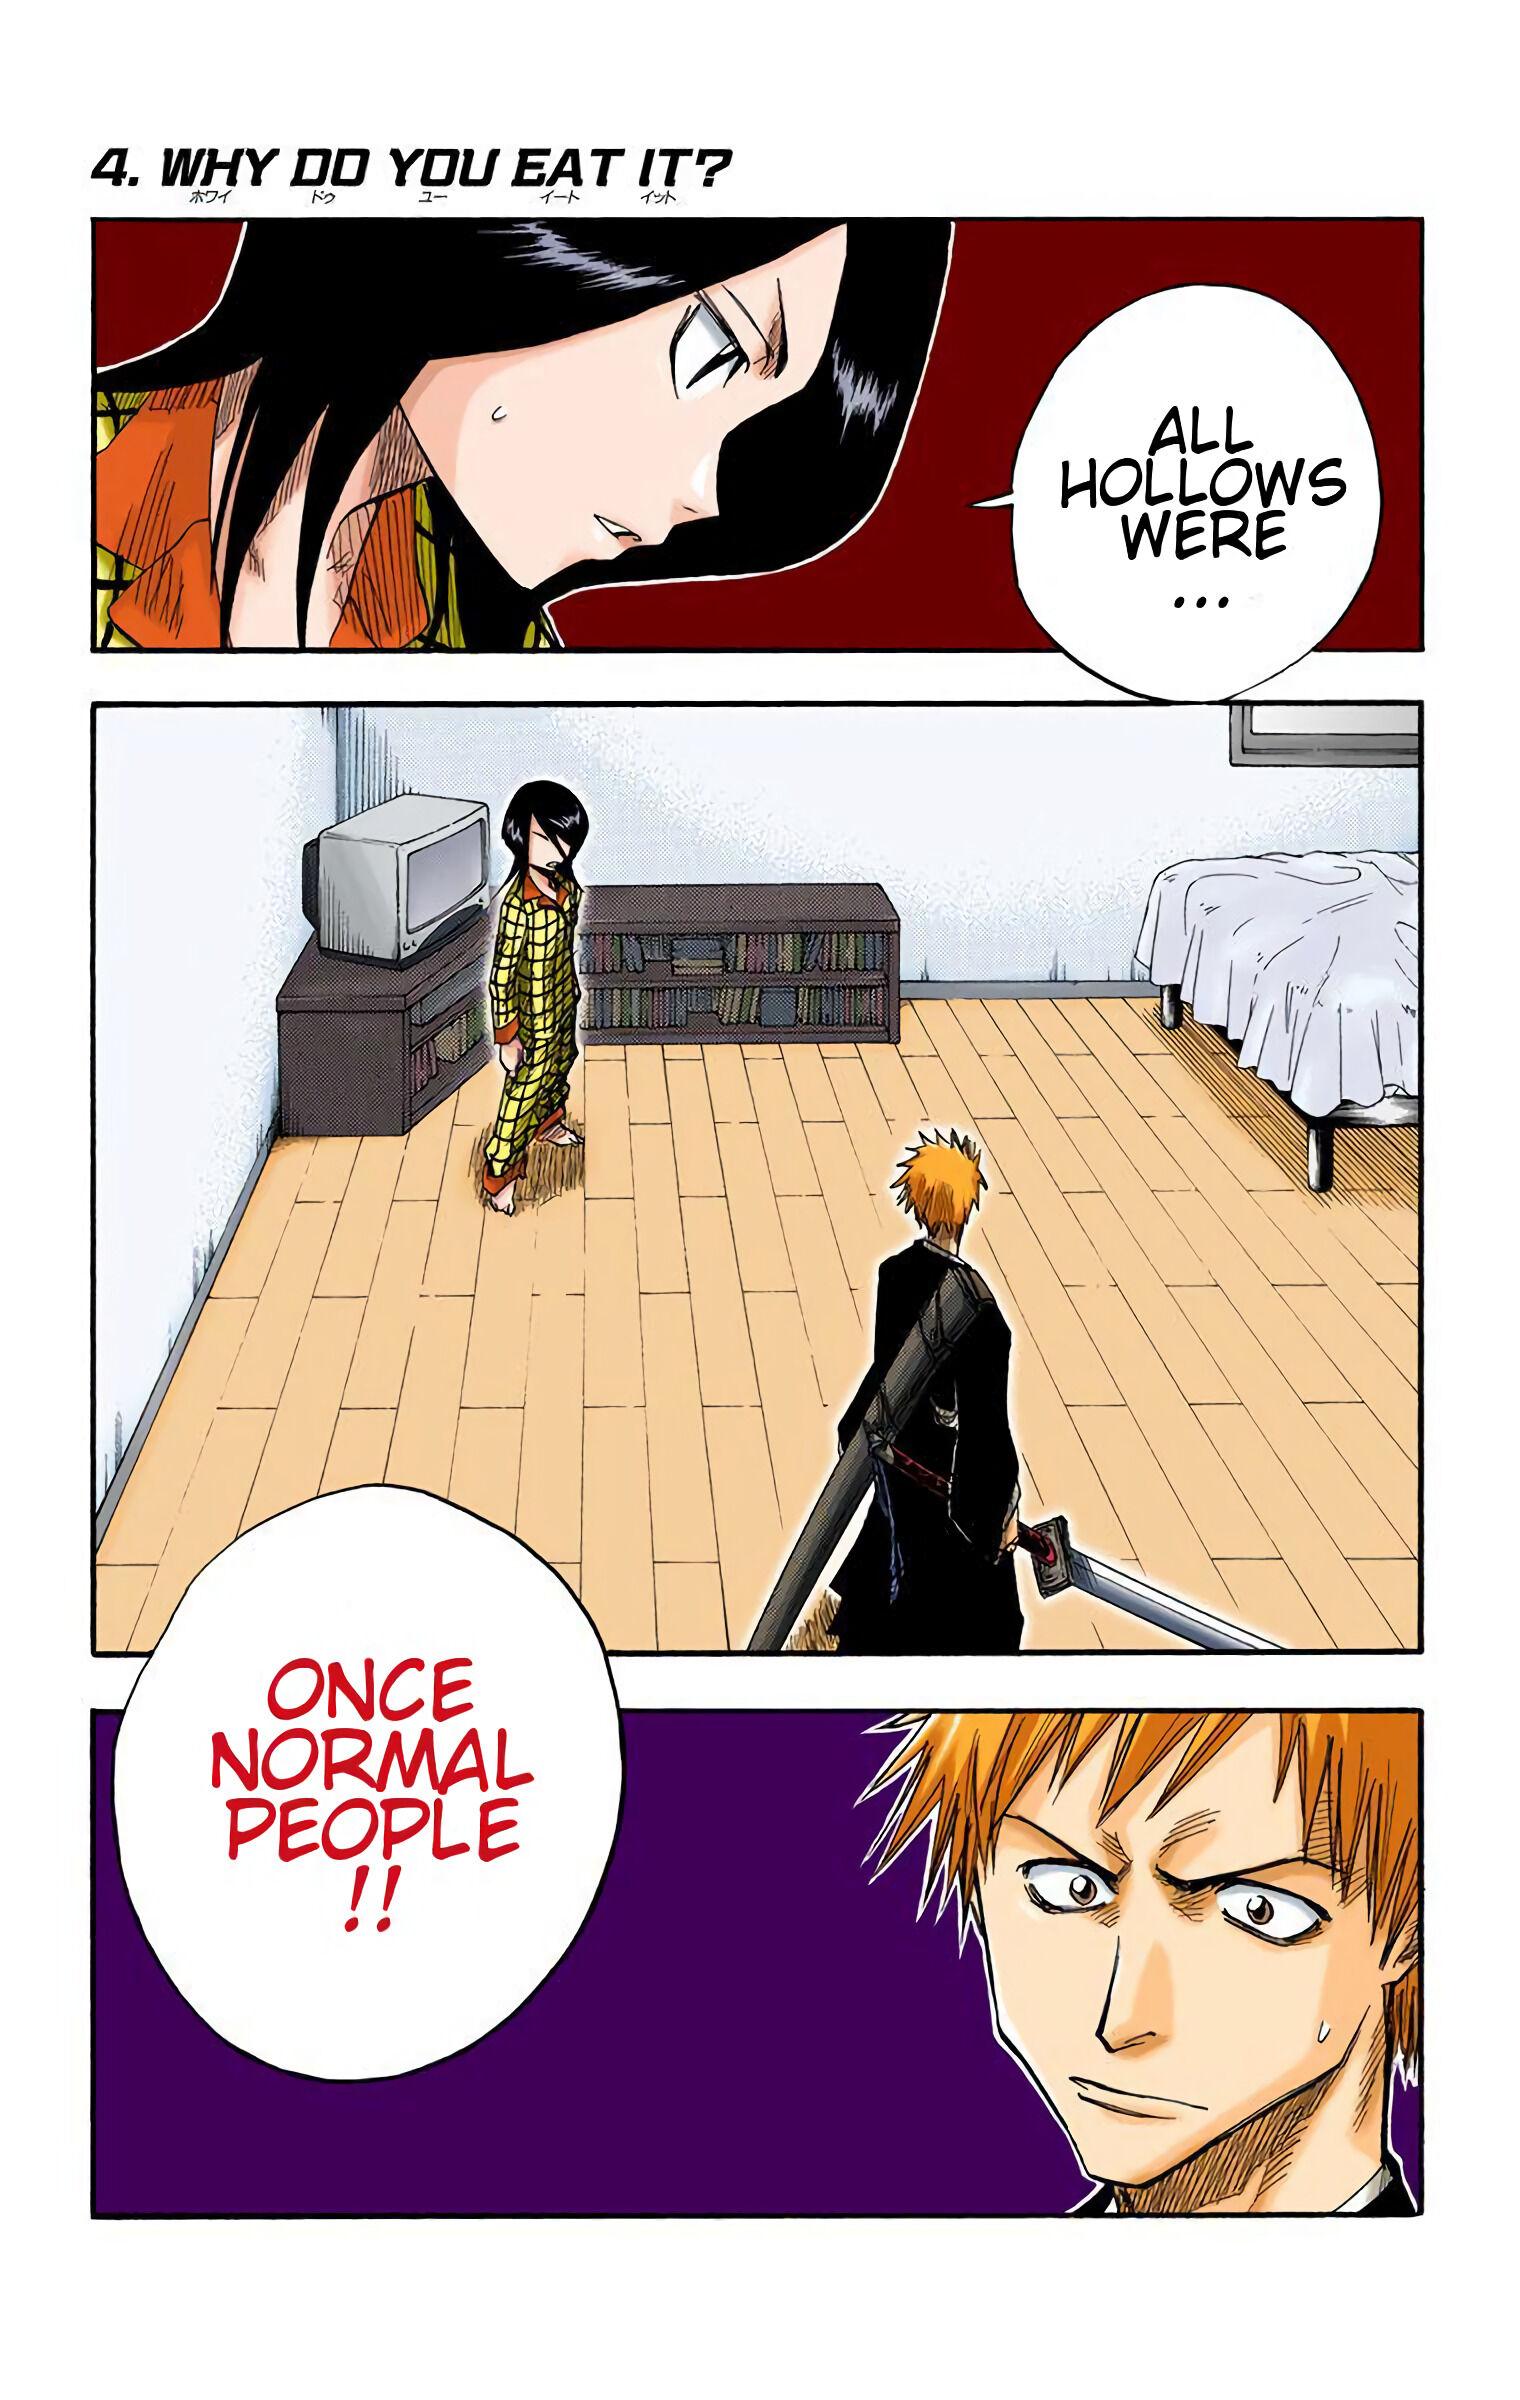 Bleach - Digital Colored Comics Vol.1 Chapter 4: Why Do You Eat It? - Picture 1